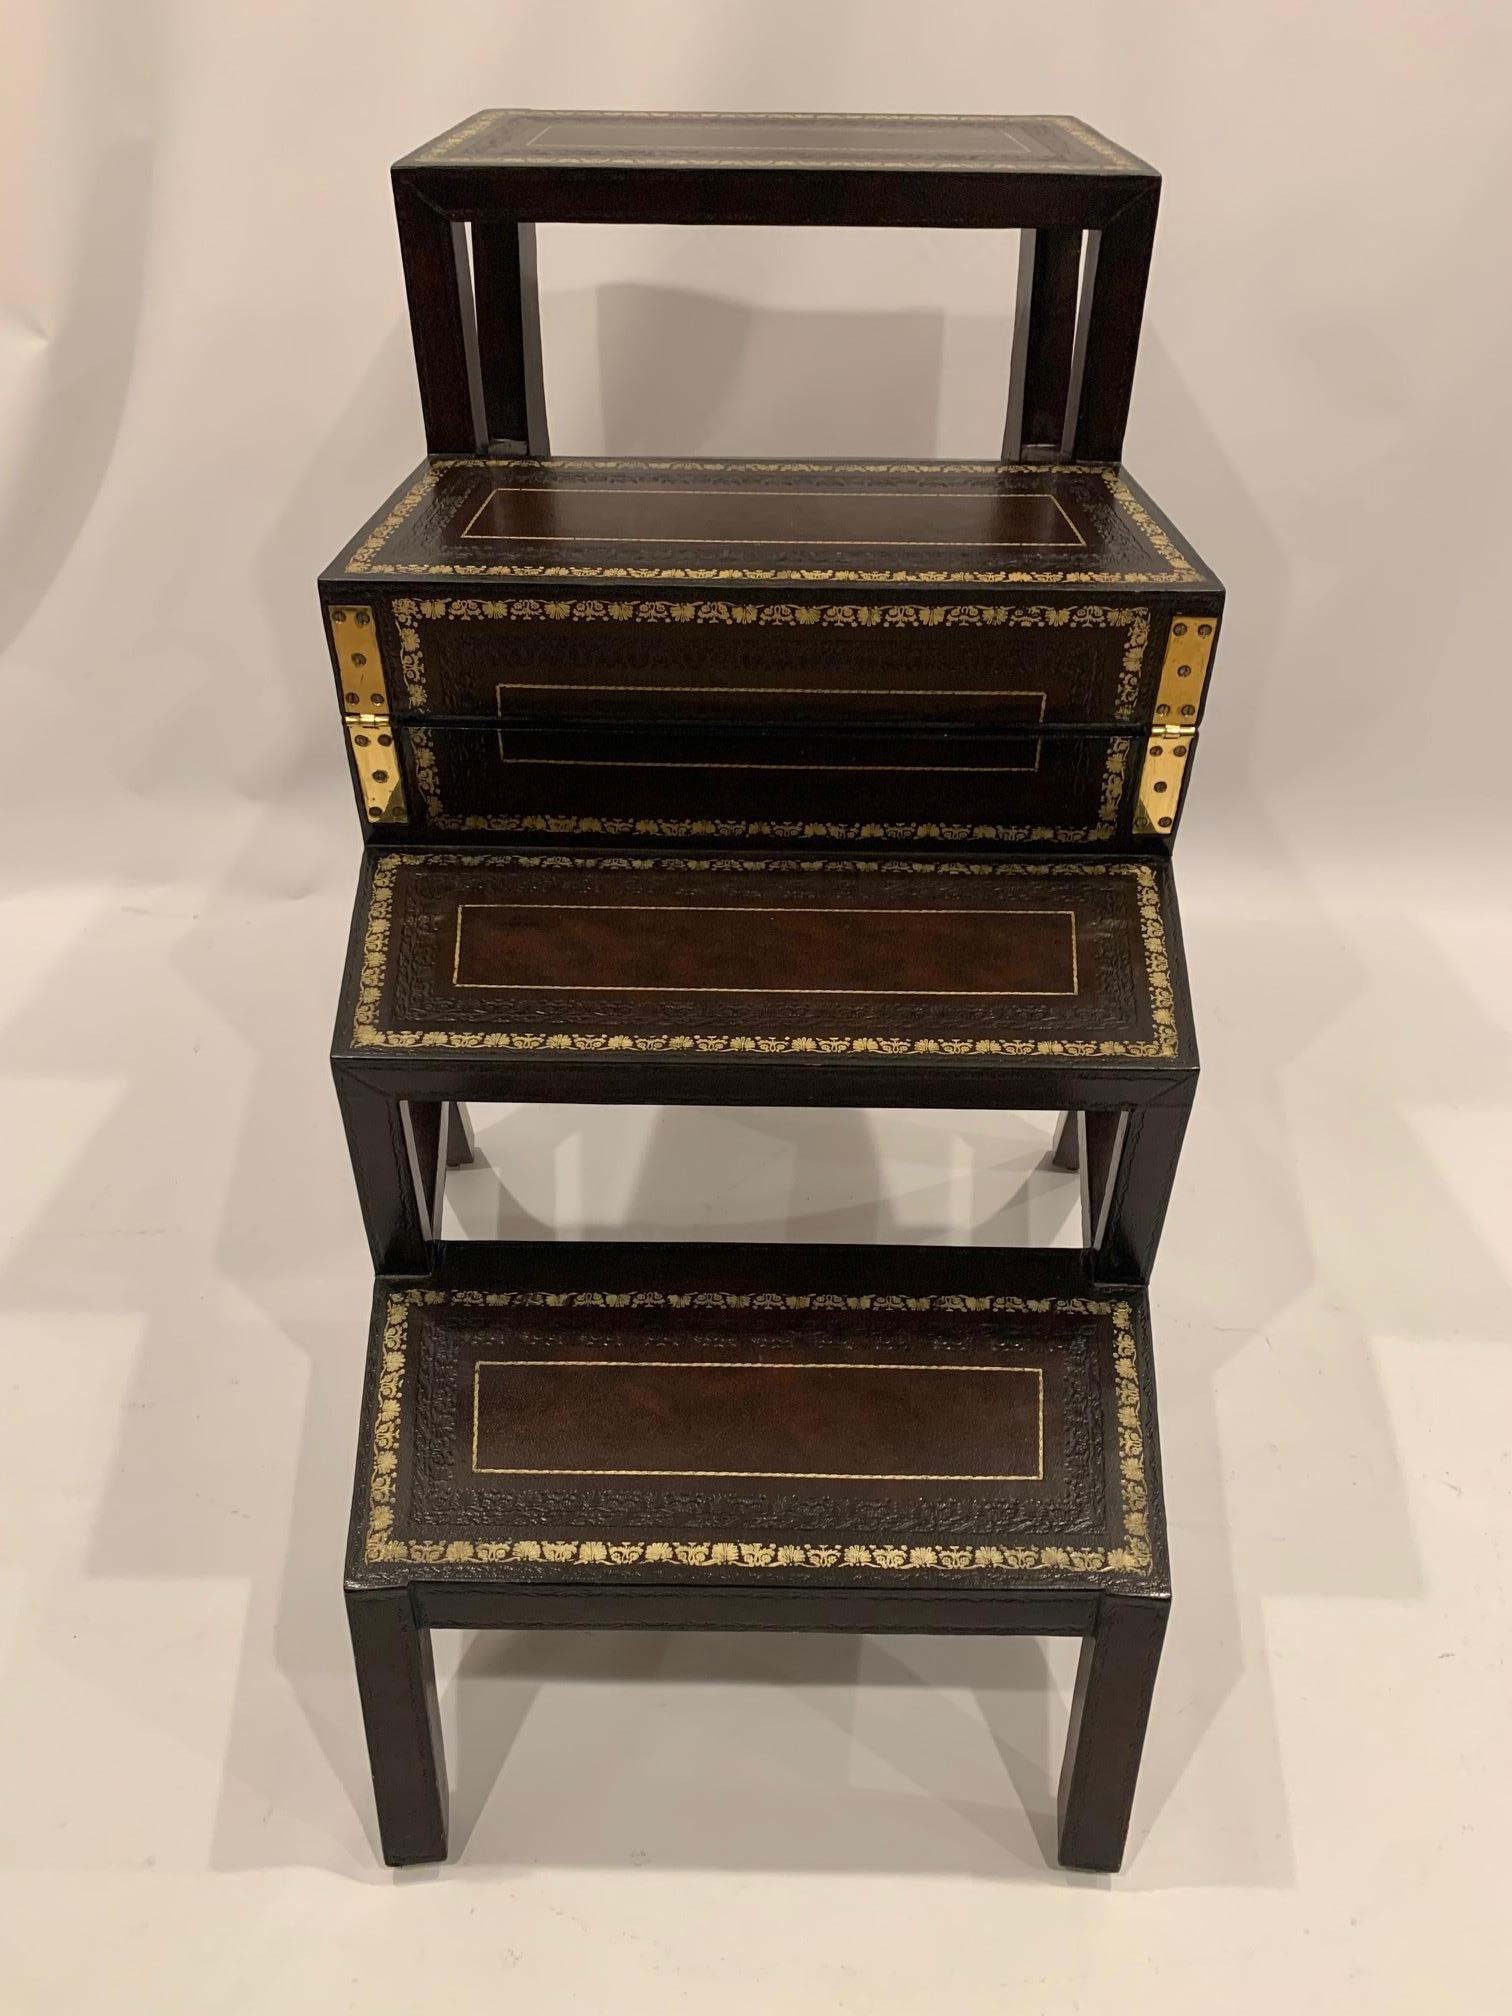 A cleverly crafted chair that opens to become functional library steps having handsome mahogany structure wrapped in gorgeous tooled leather. 
Chair is 35 H x 23 D x 21.5 W.